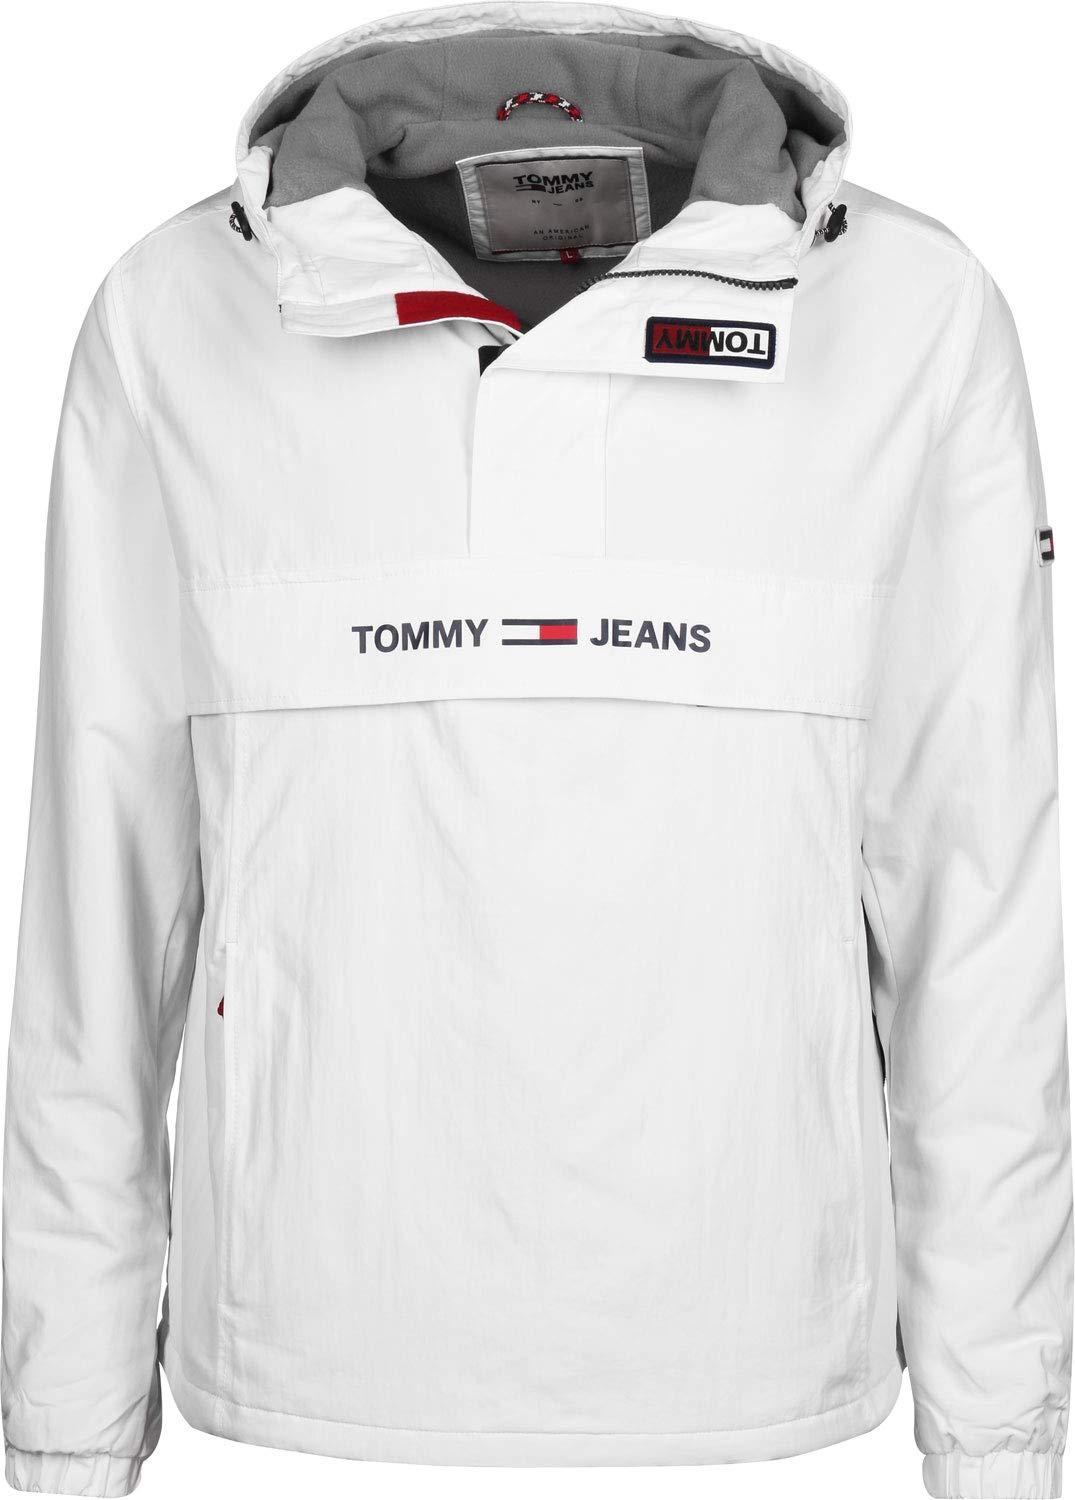 Tommy Hilfiger Synthetic Half Zip Popover Jacket in White for Men - Lyst